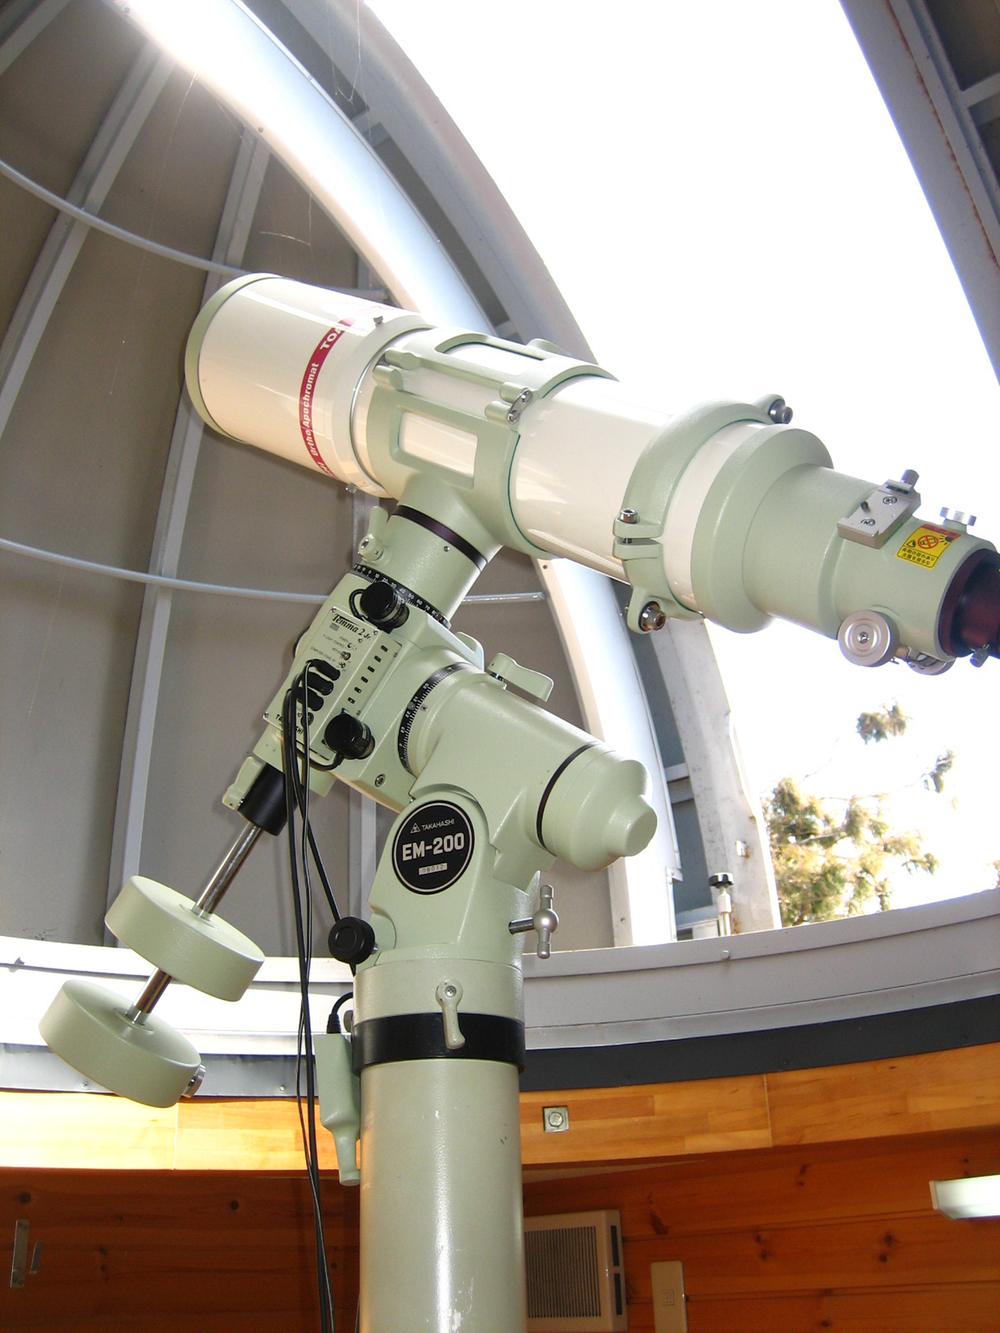 Other introspection. Astronomical telescope of the attic room